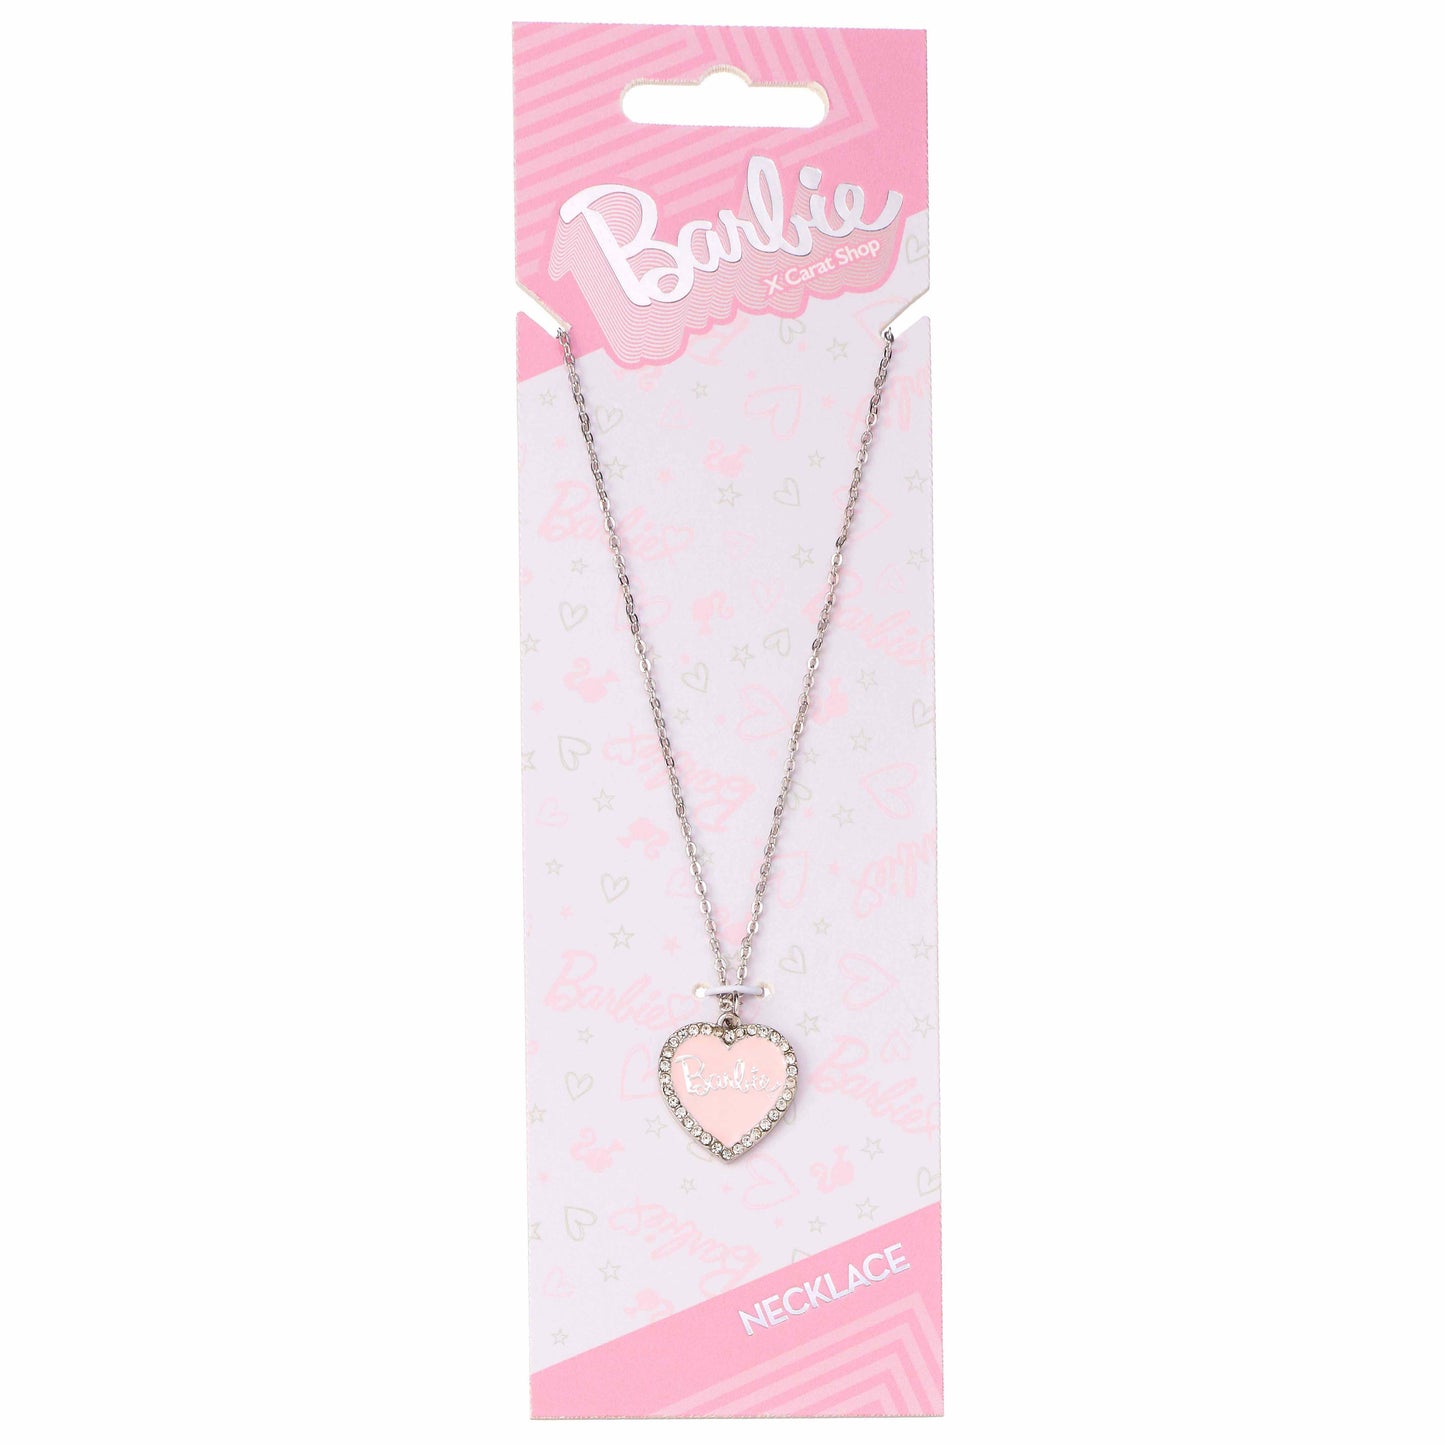 Barbie™️ Pink Enamel Heart Pendant Necklace with Crystals